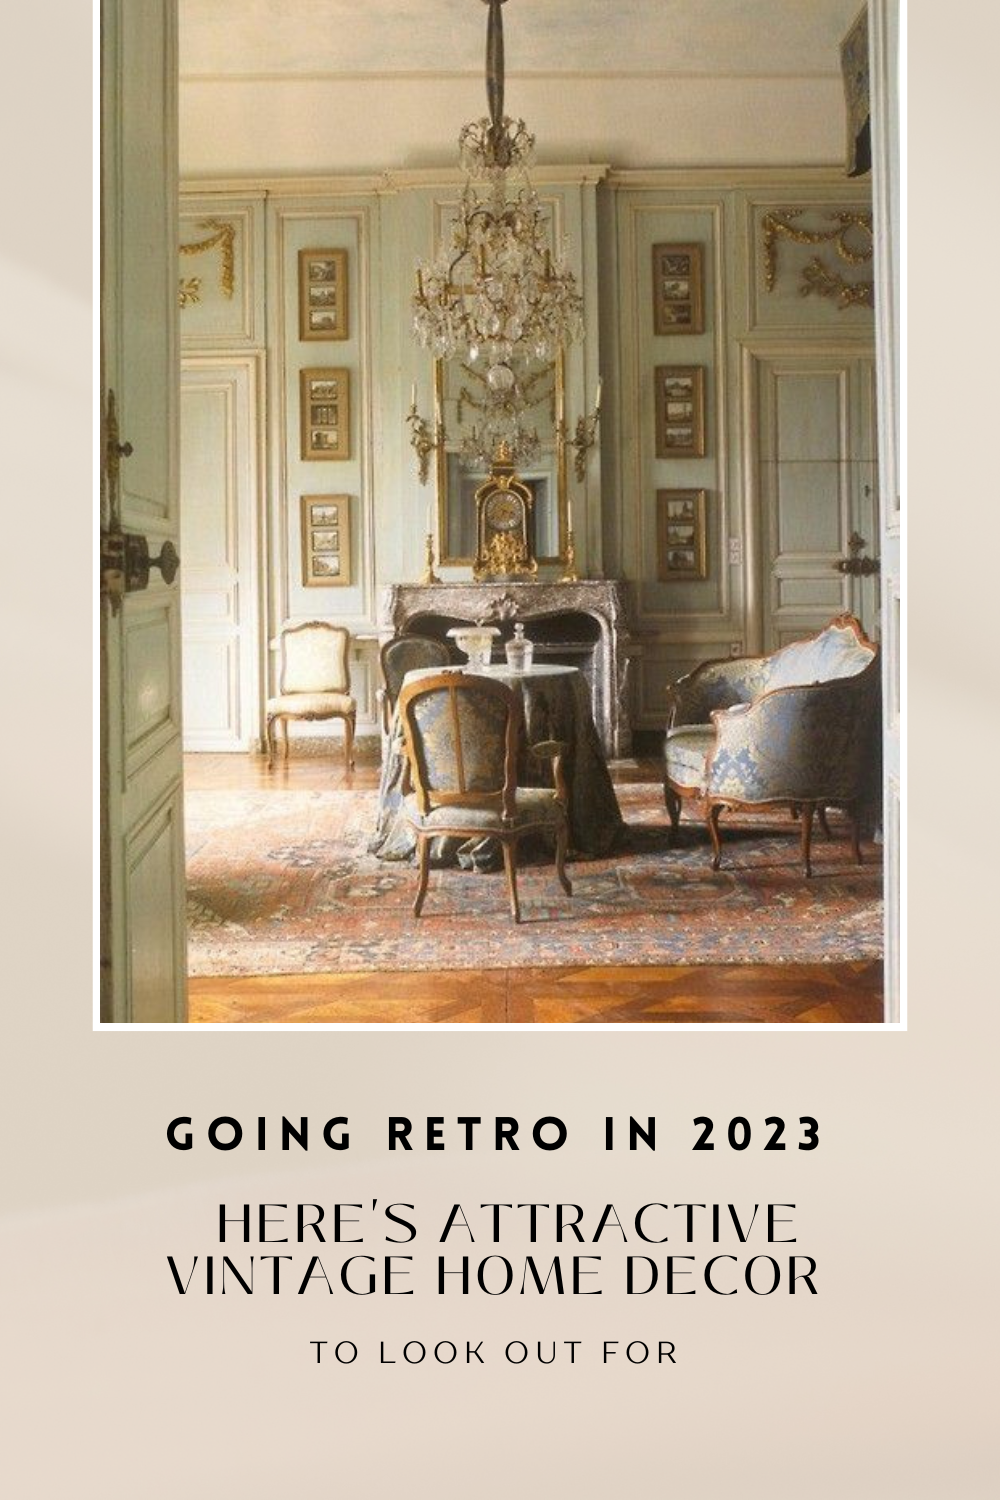 Going Retro in 2023? Here's Attractive Vintage Home Decor to Look Out For